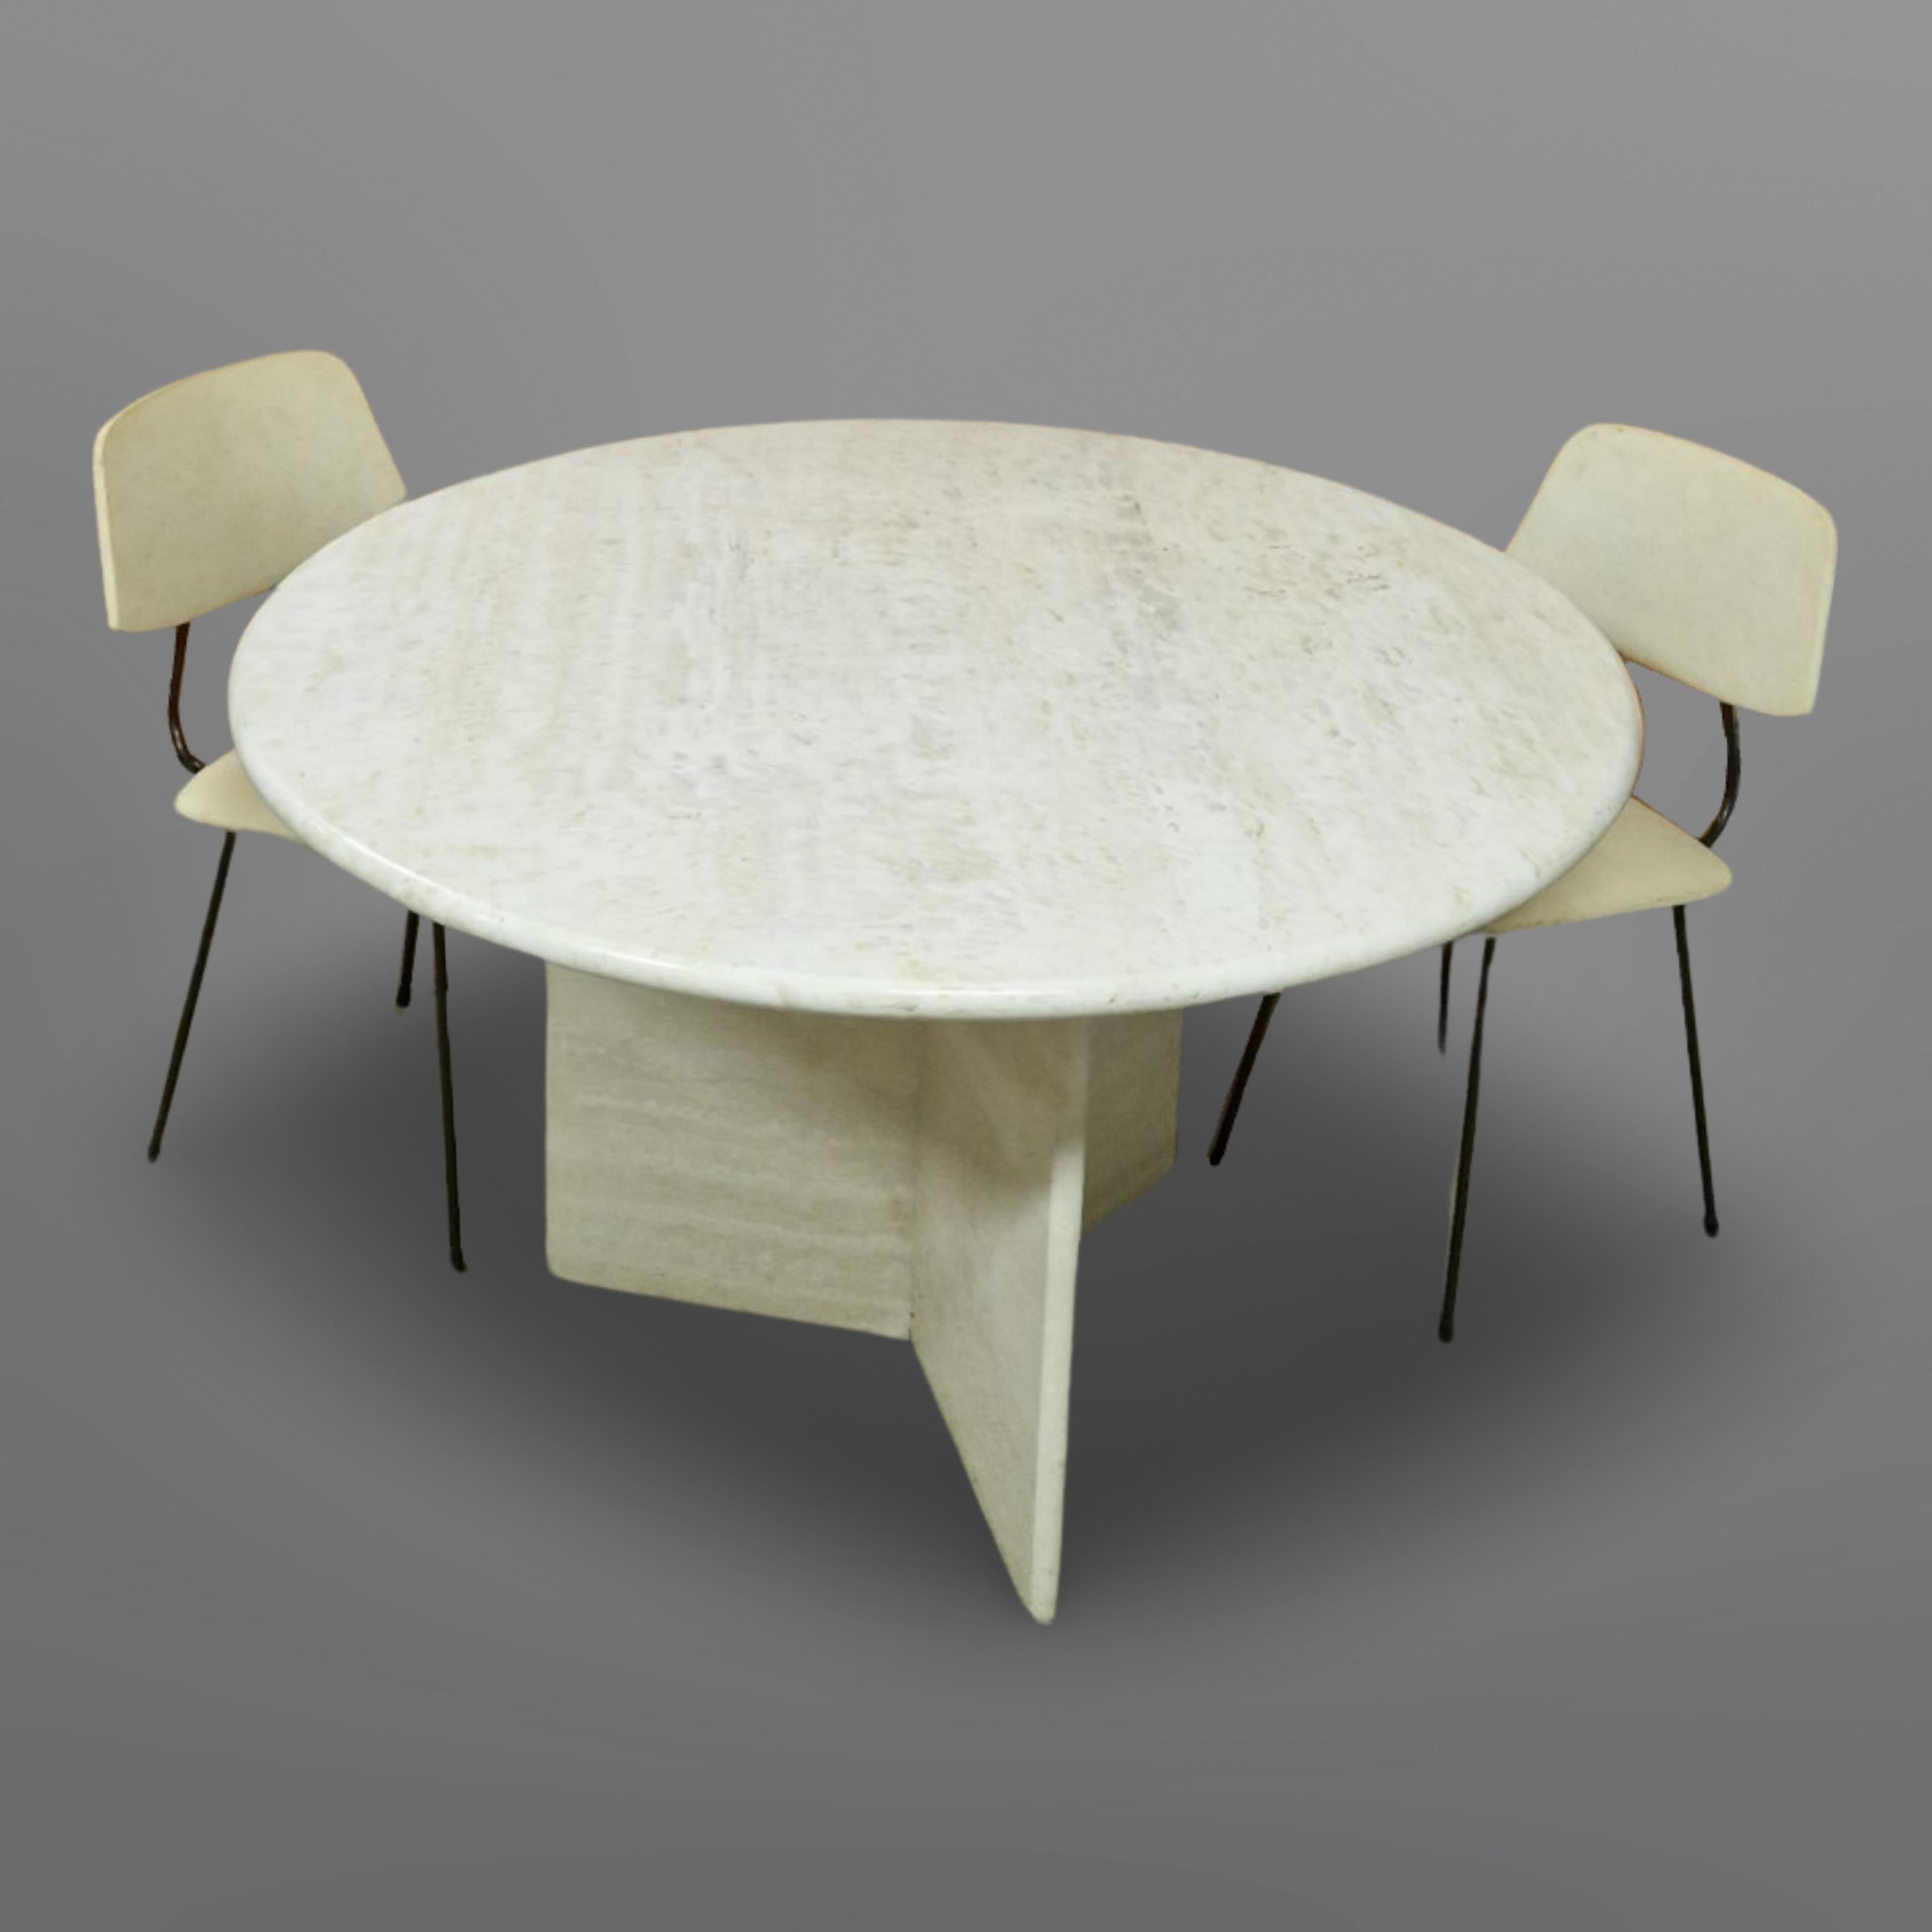 Round dining table in Hollywood regency style. Made from travertine. The 3cm thick top has a smooth surface and stand on a base made from three slabs of travertine. In the middle it has a brass point to center the top on the base. 

Travertine is a